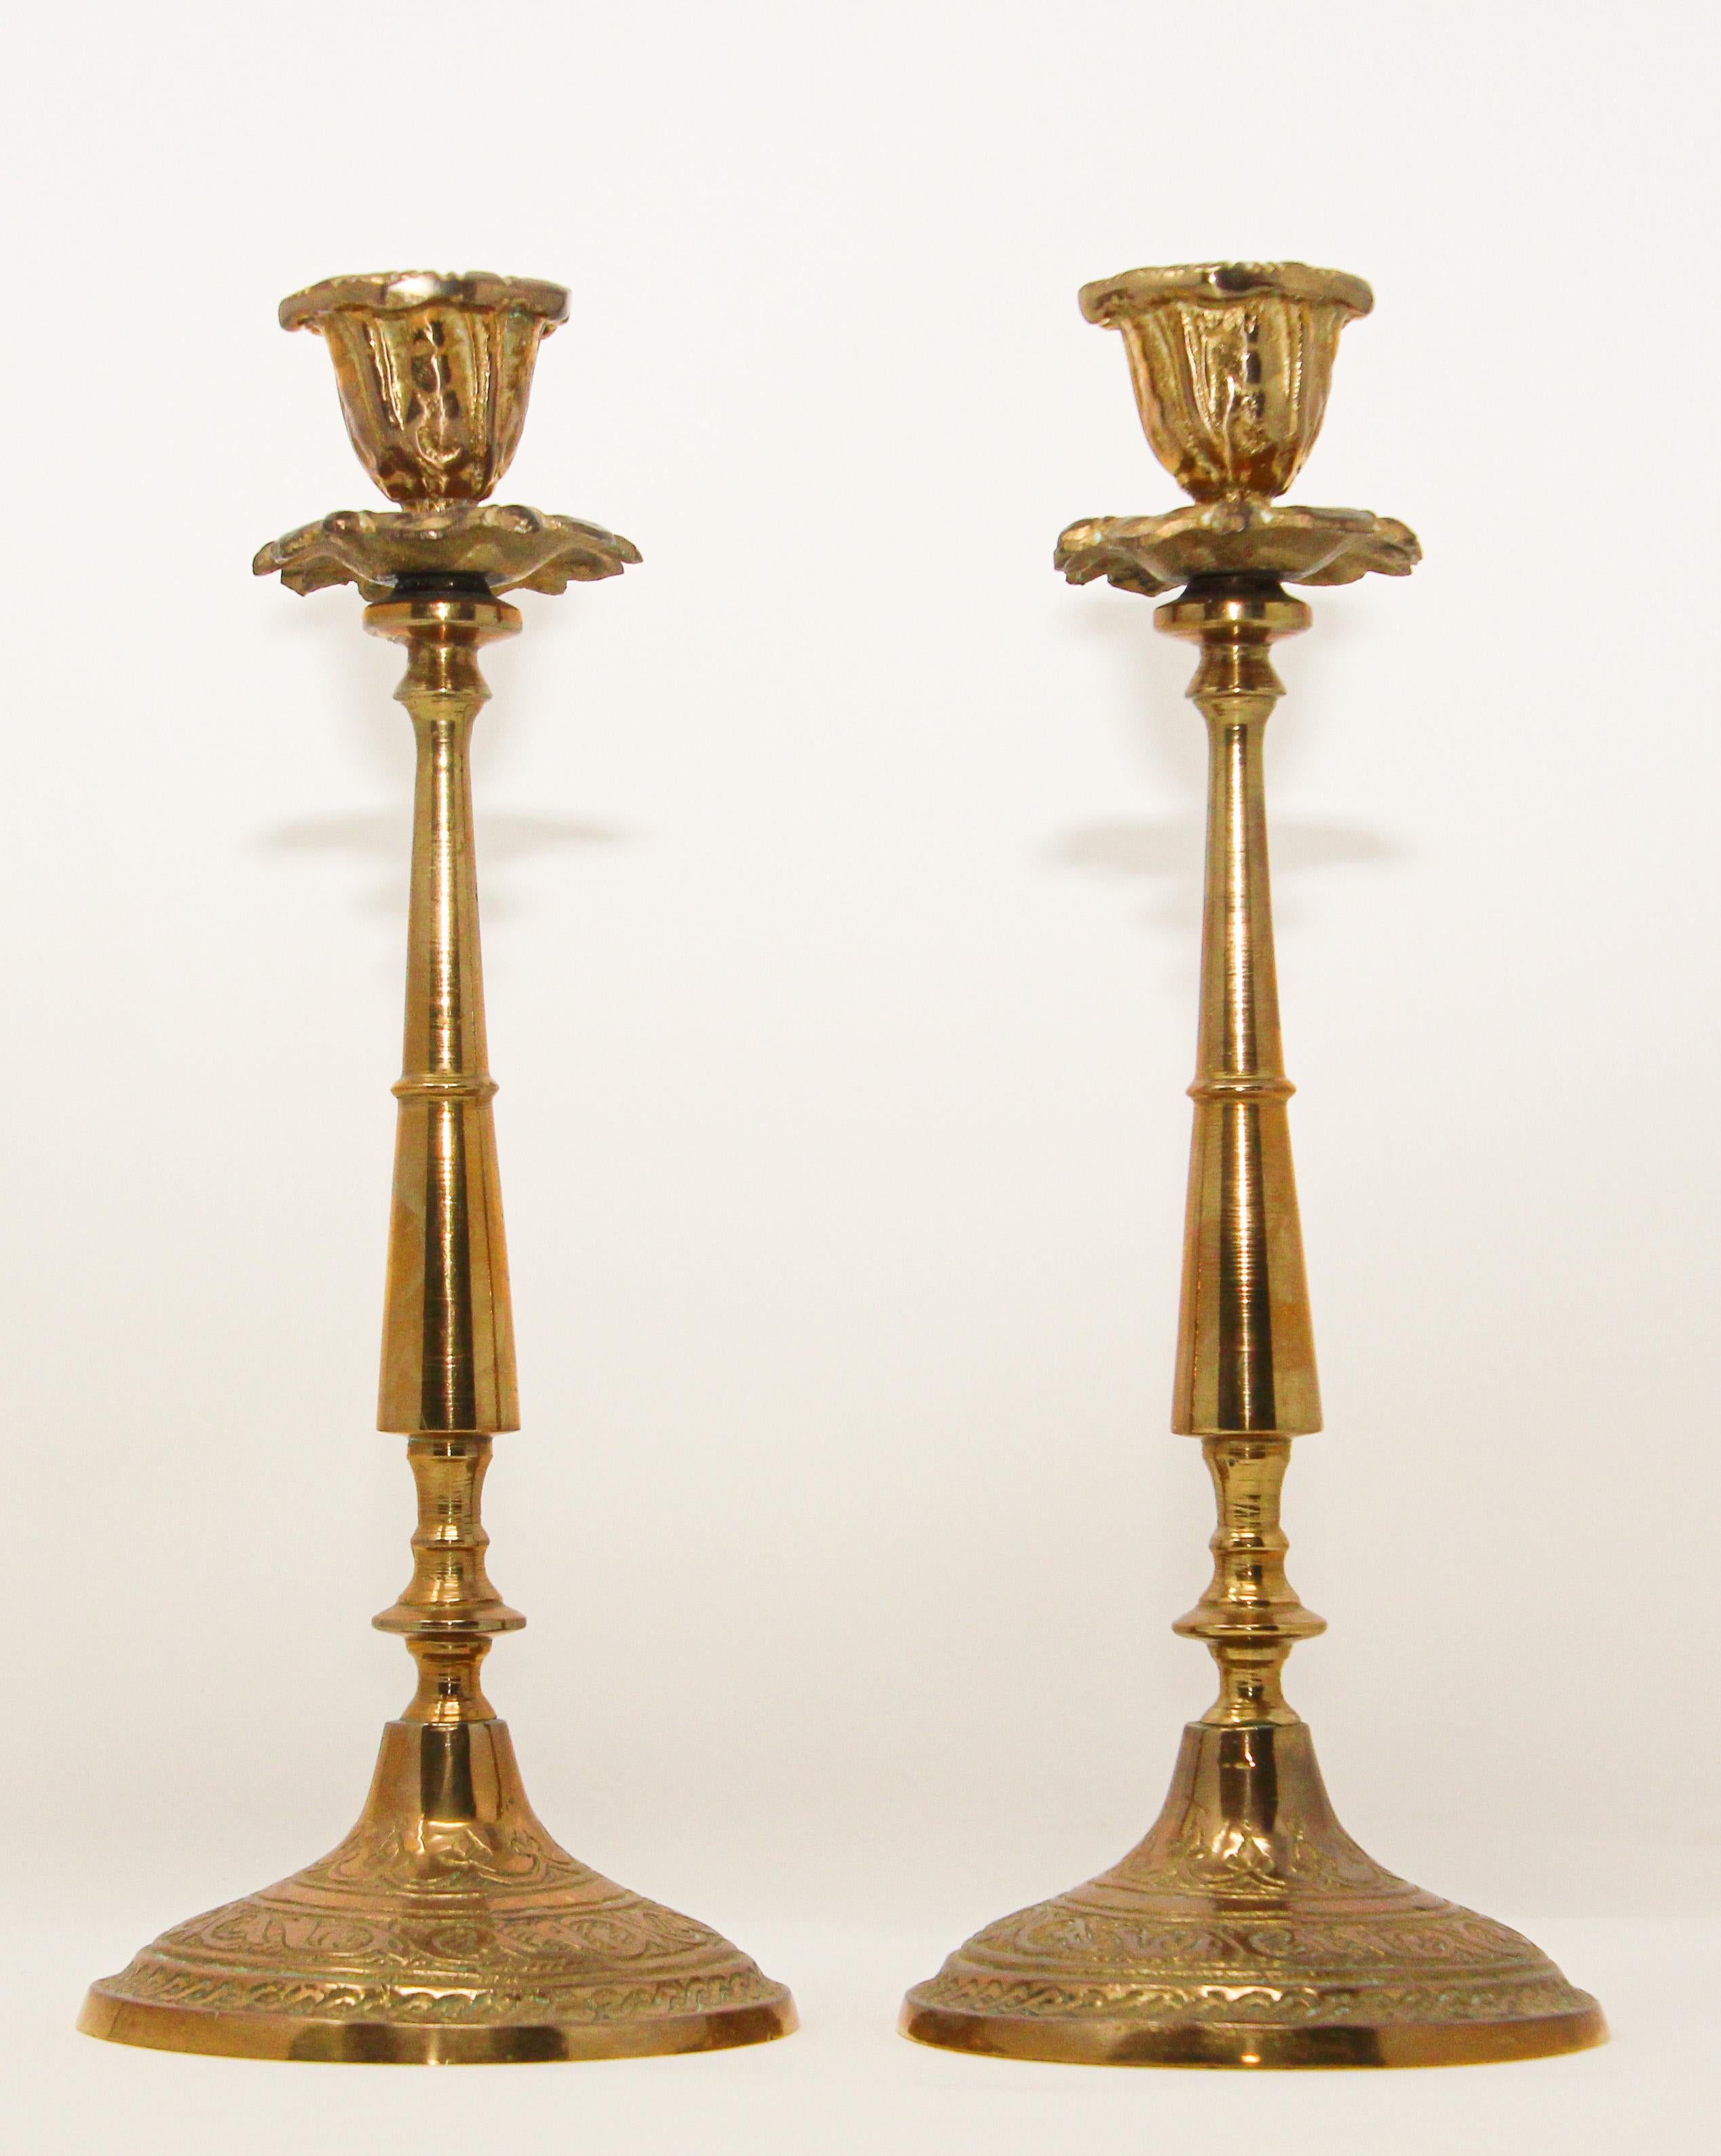 Pair of 19th century Victorian brass polished candlesticks hand-tooled brass candlesticks.
Engraved brass with round base.
Nice heavy handcrafted and hammered Victorian brass candle sticks, candleholders, finely hand chased with foliage